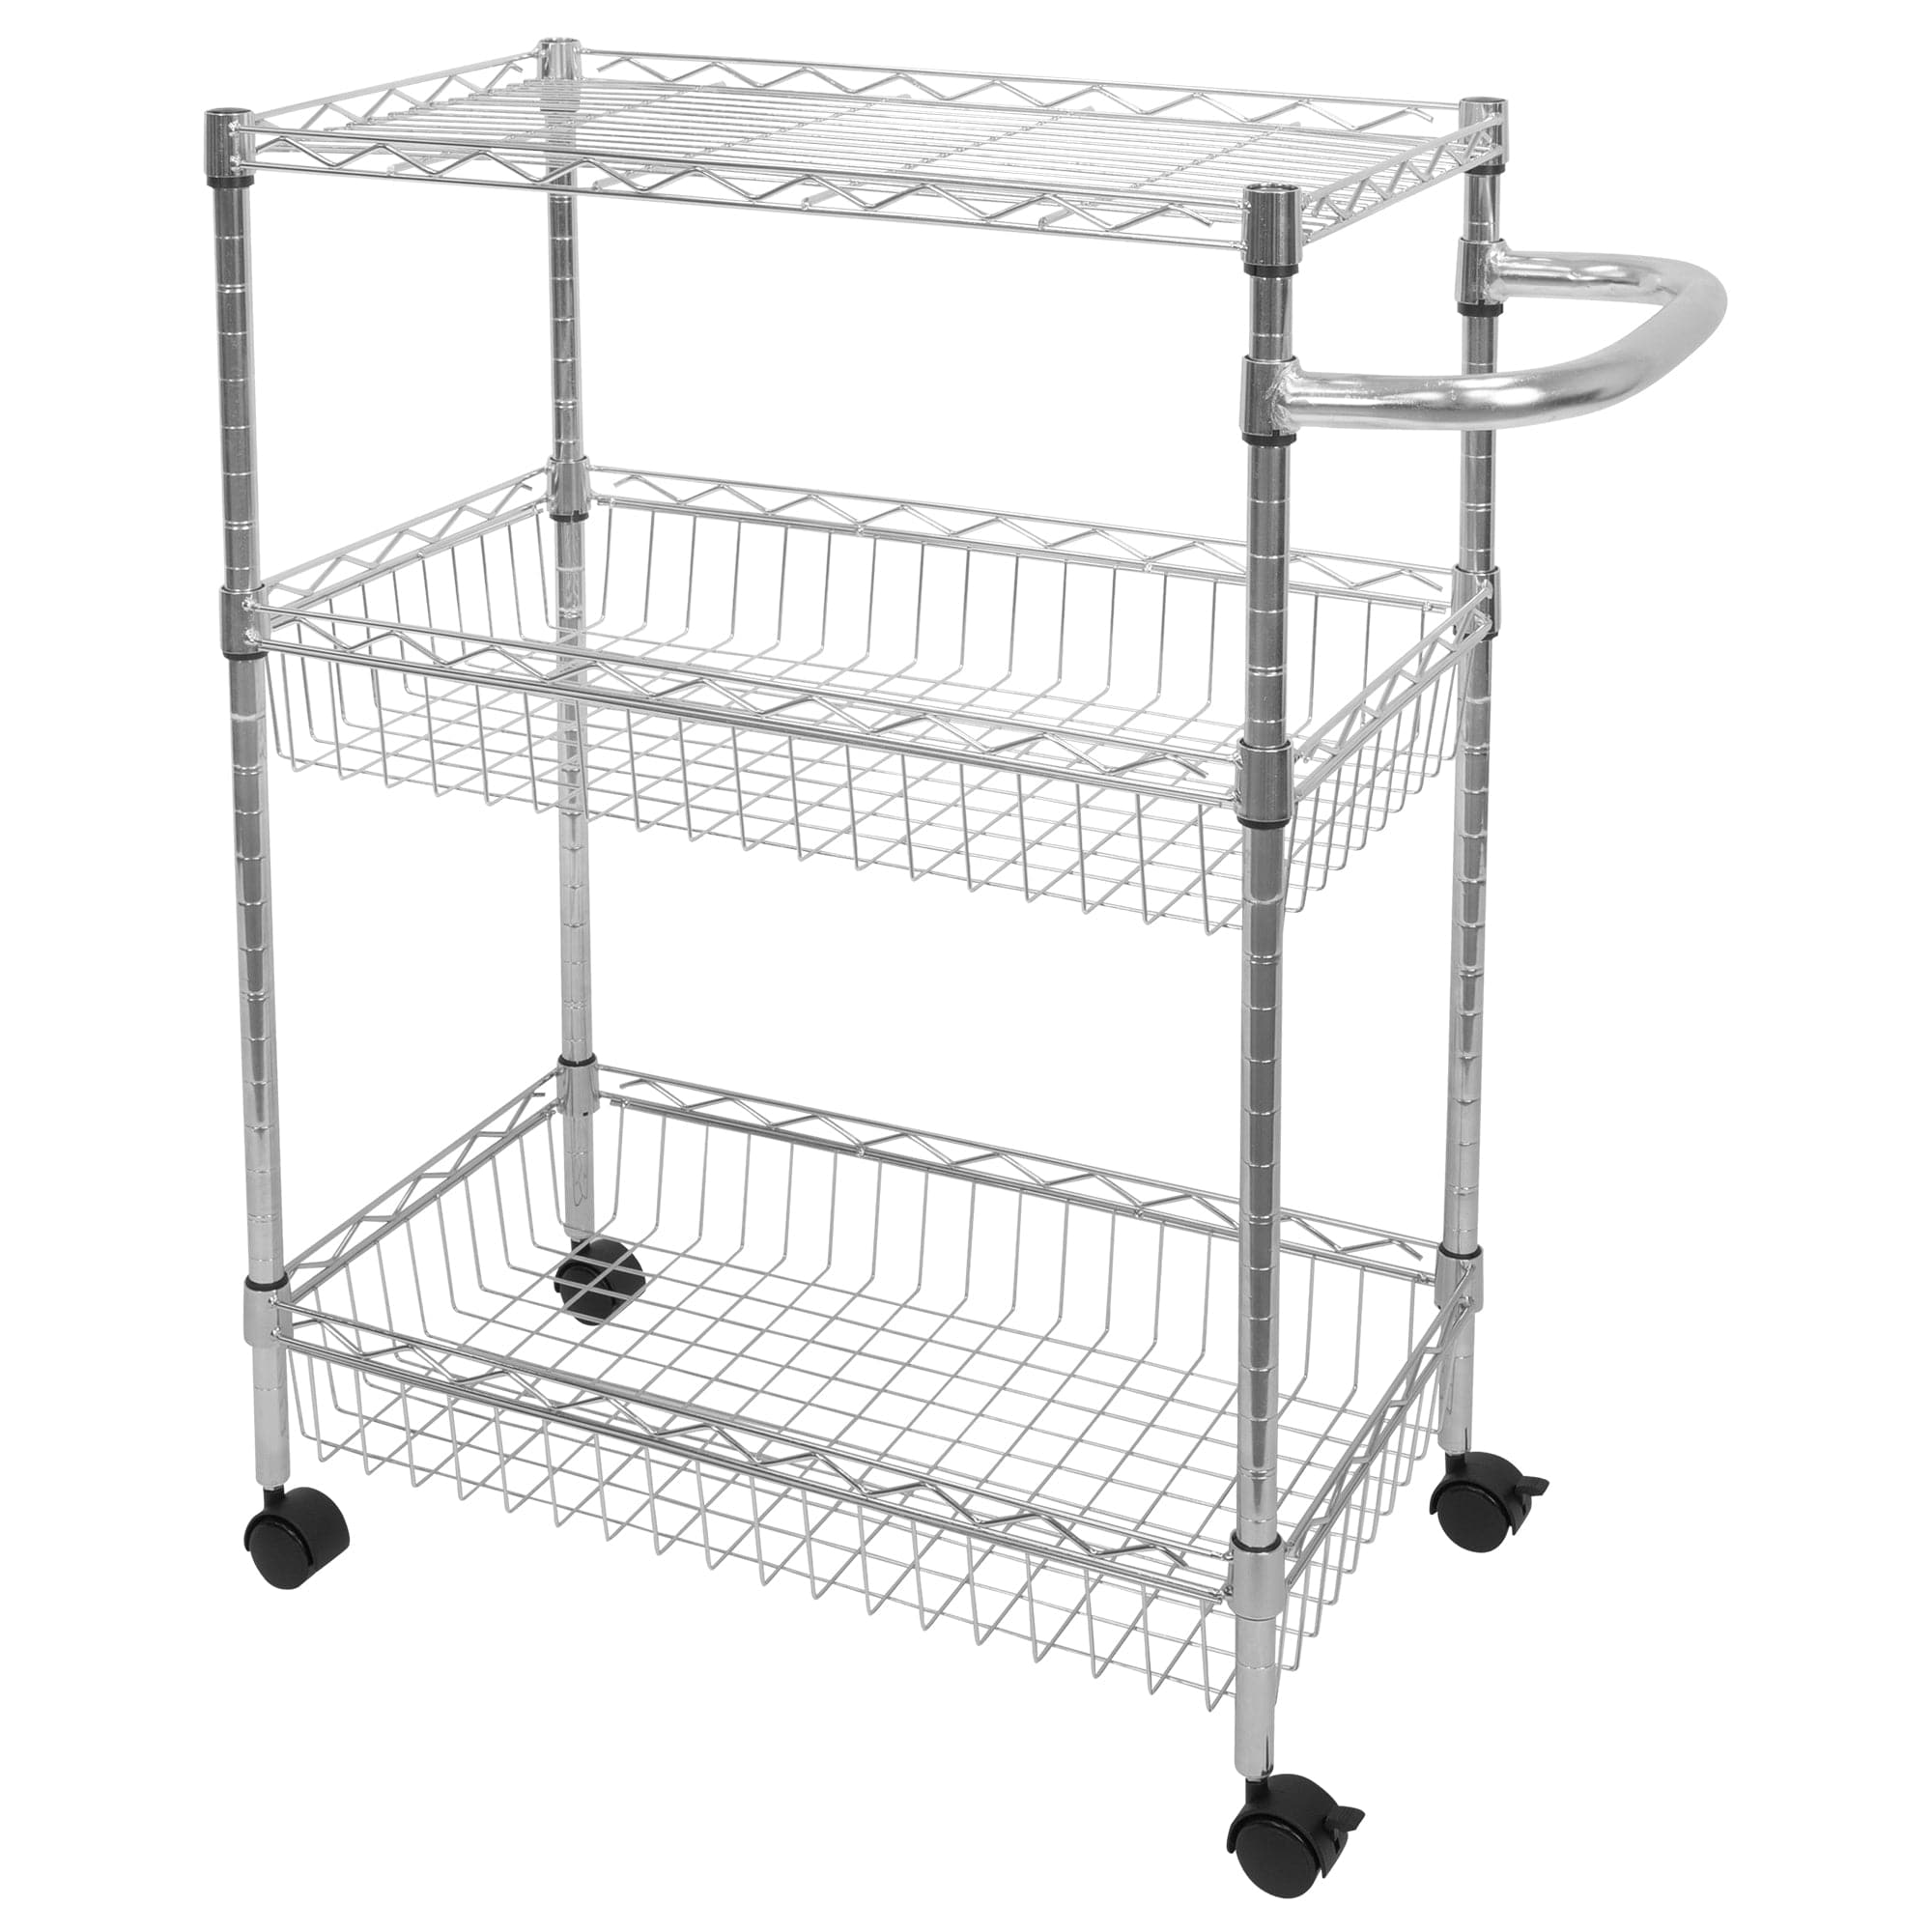 https://cdn.shopify.com/s/files/1/0051/3674/4566/products/3-tier-rolling-utility-cart-908798.jpg?v=1687277155